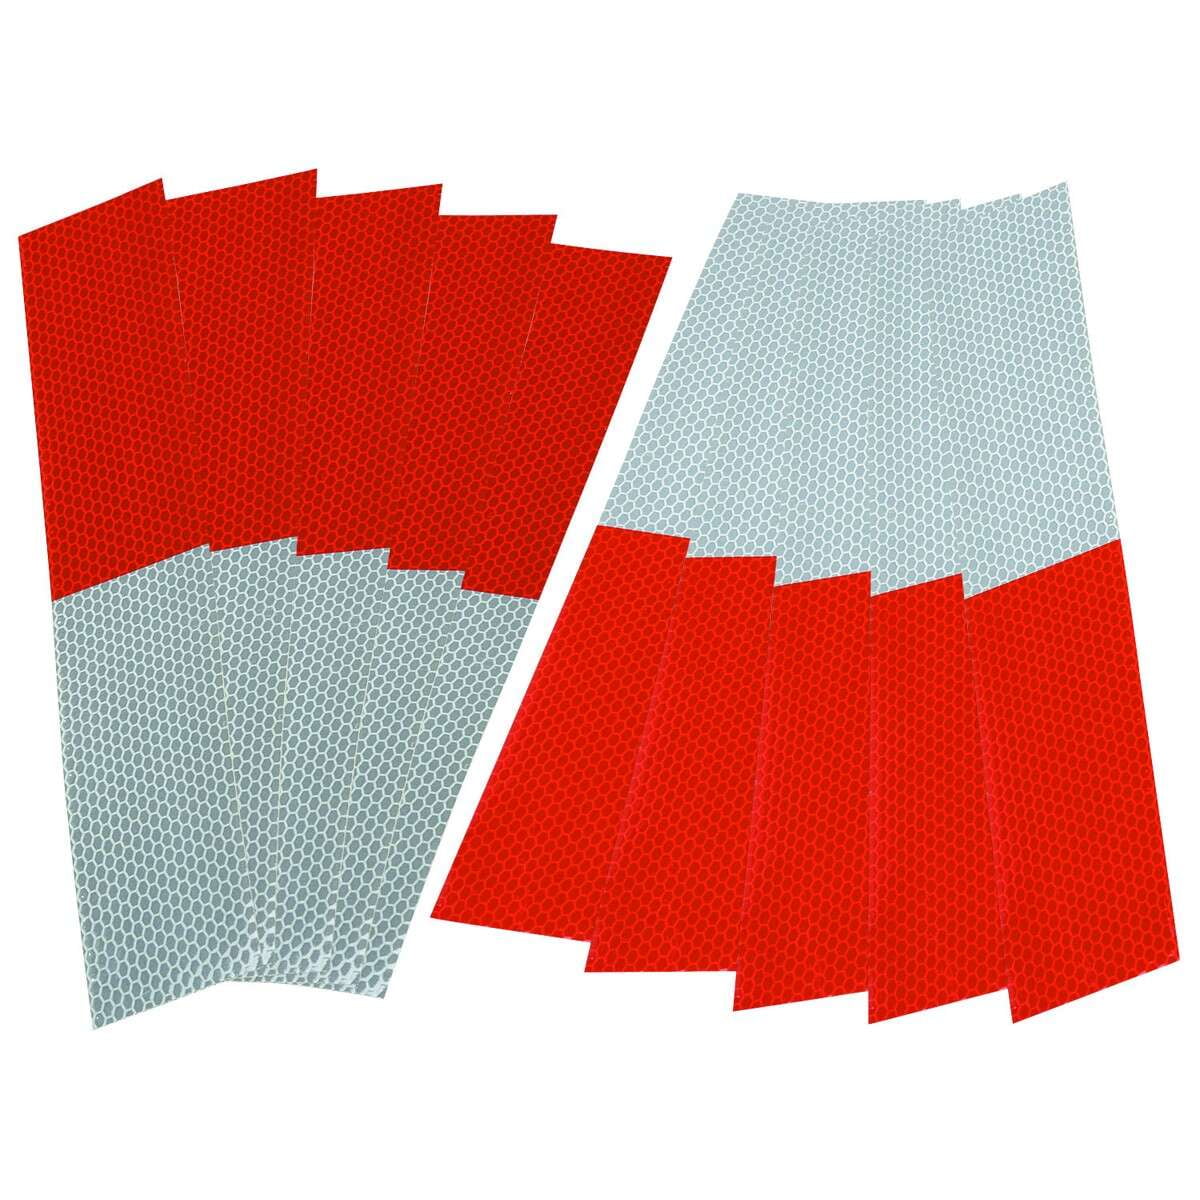 Details about   10 pcs DOT-C2 Conspicuity Reflective Tape 2x12” Red White Strip Trailer RV Truck 